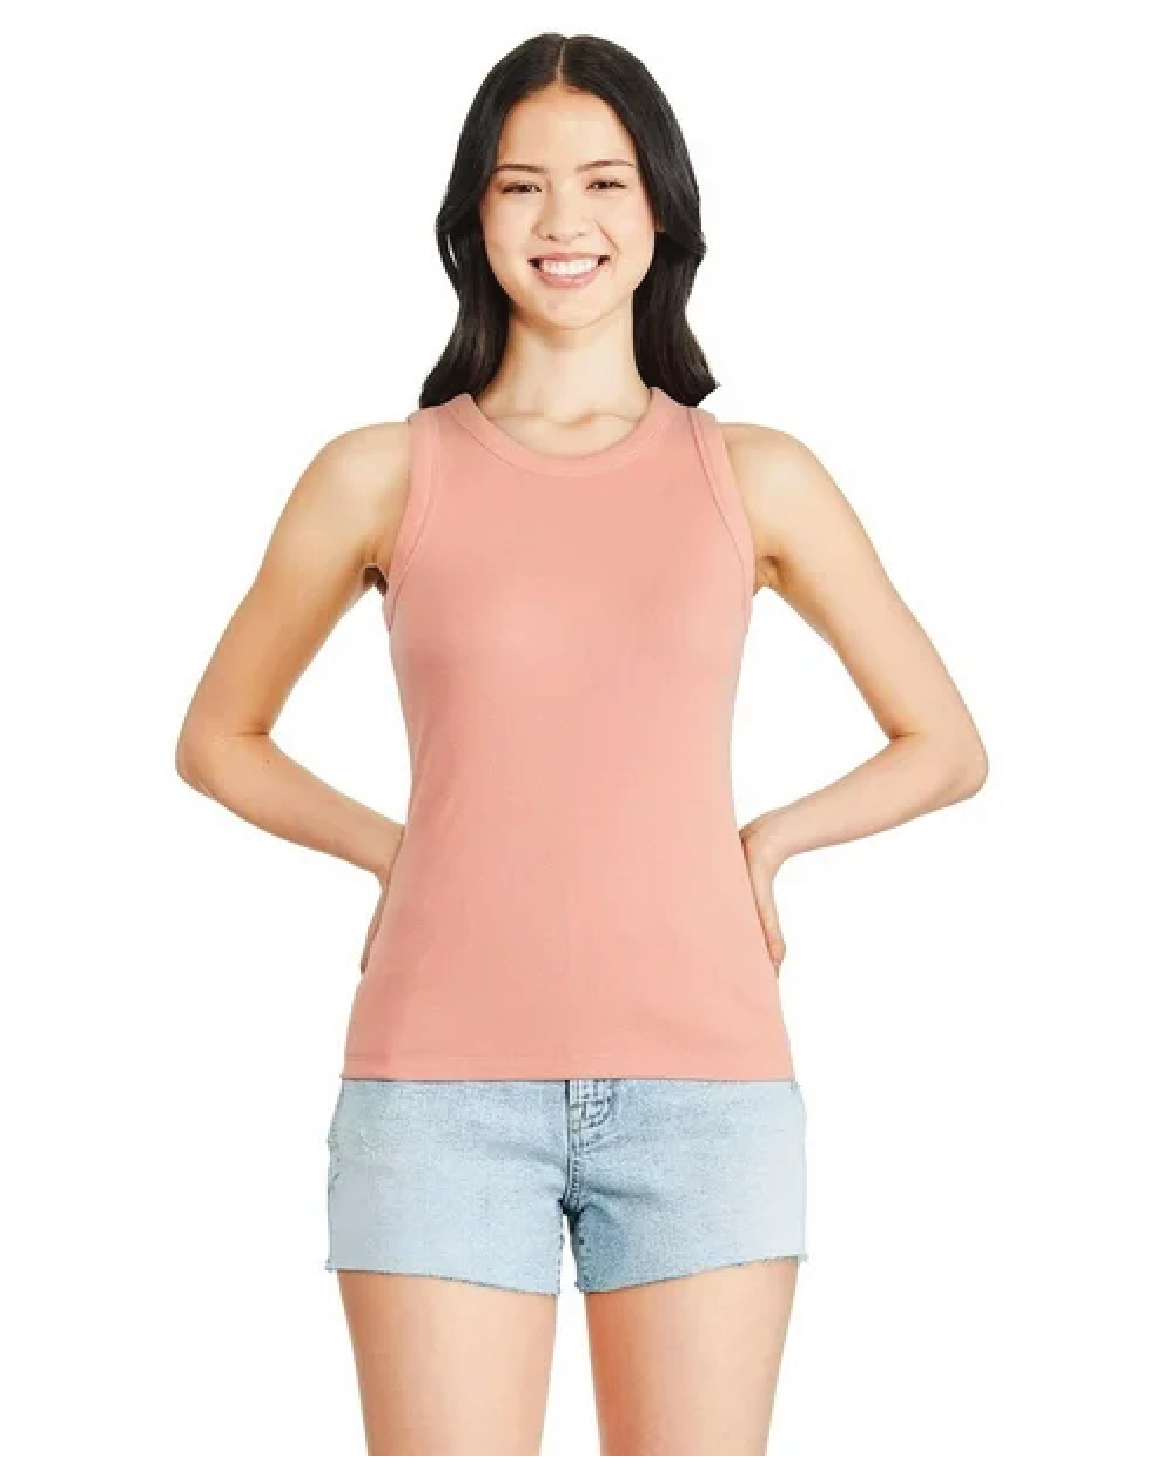 person wearing ribbed tank top 